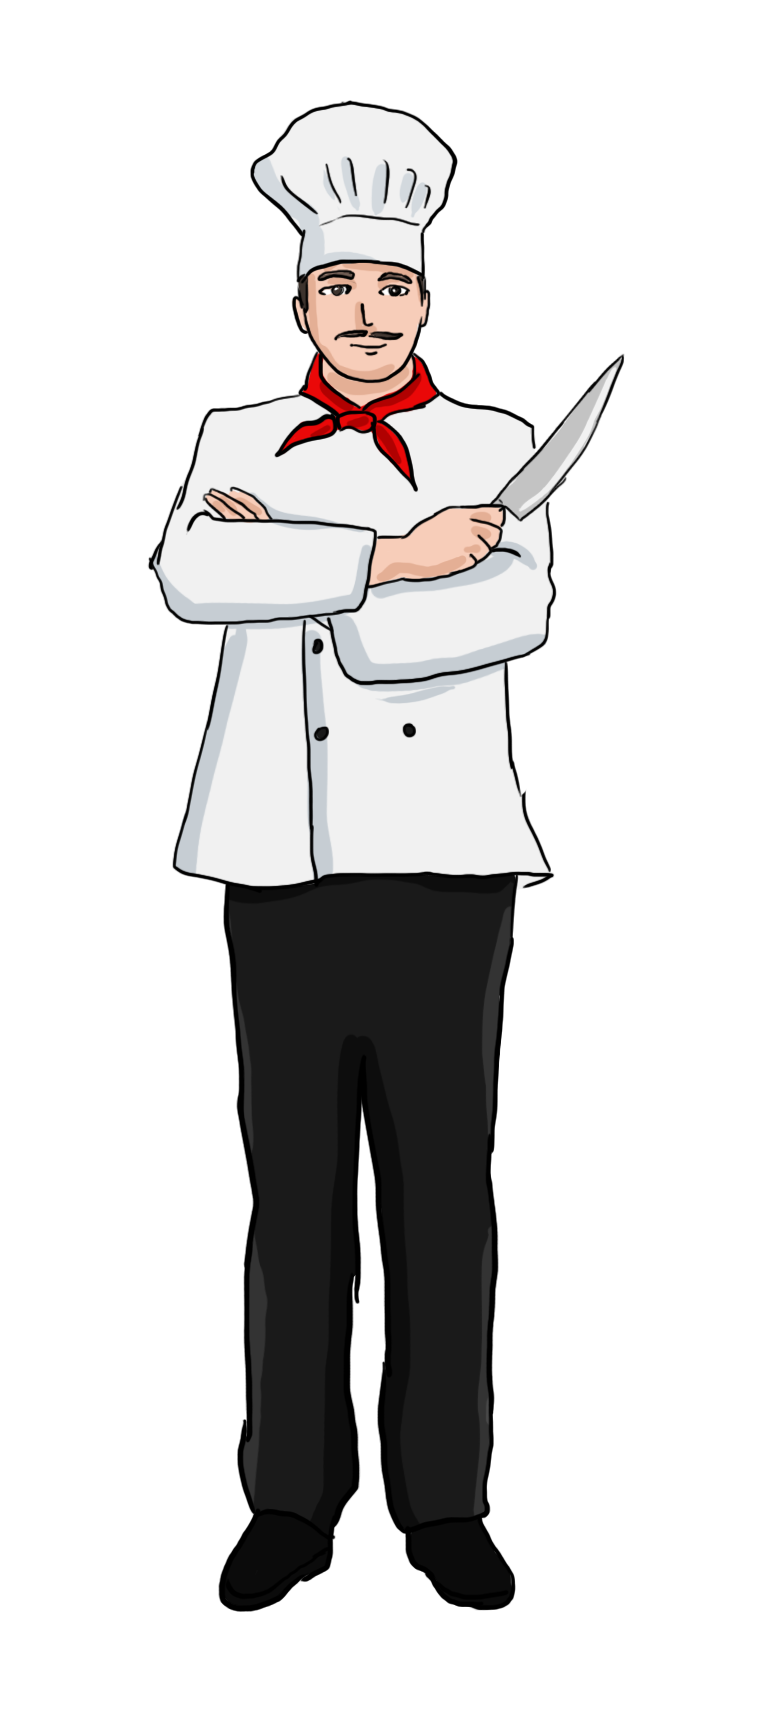 Finest collection of free to use chef clip art 2